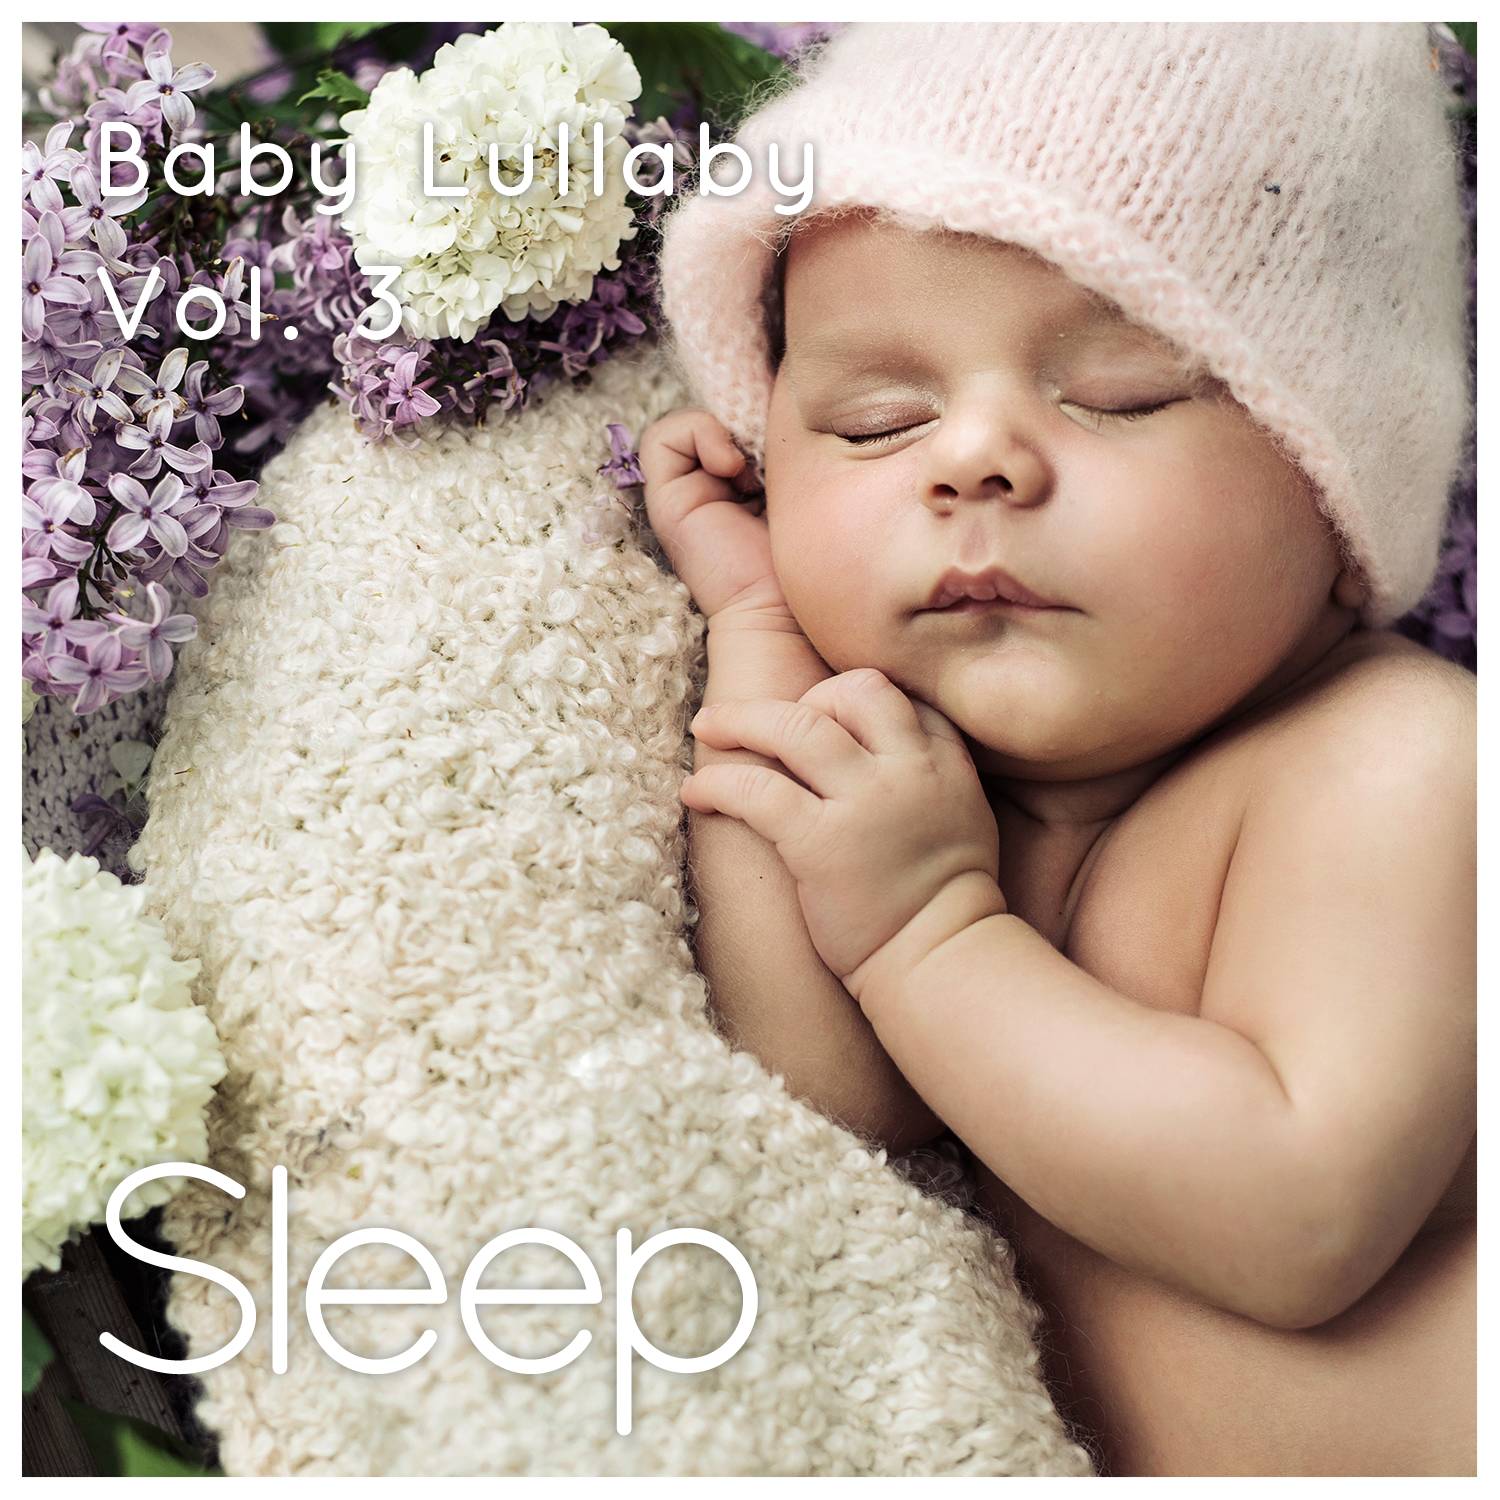 Baby Sleep Ambient Lullaby, Pt. 14